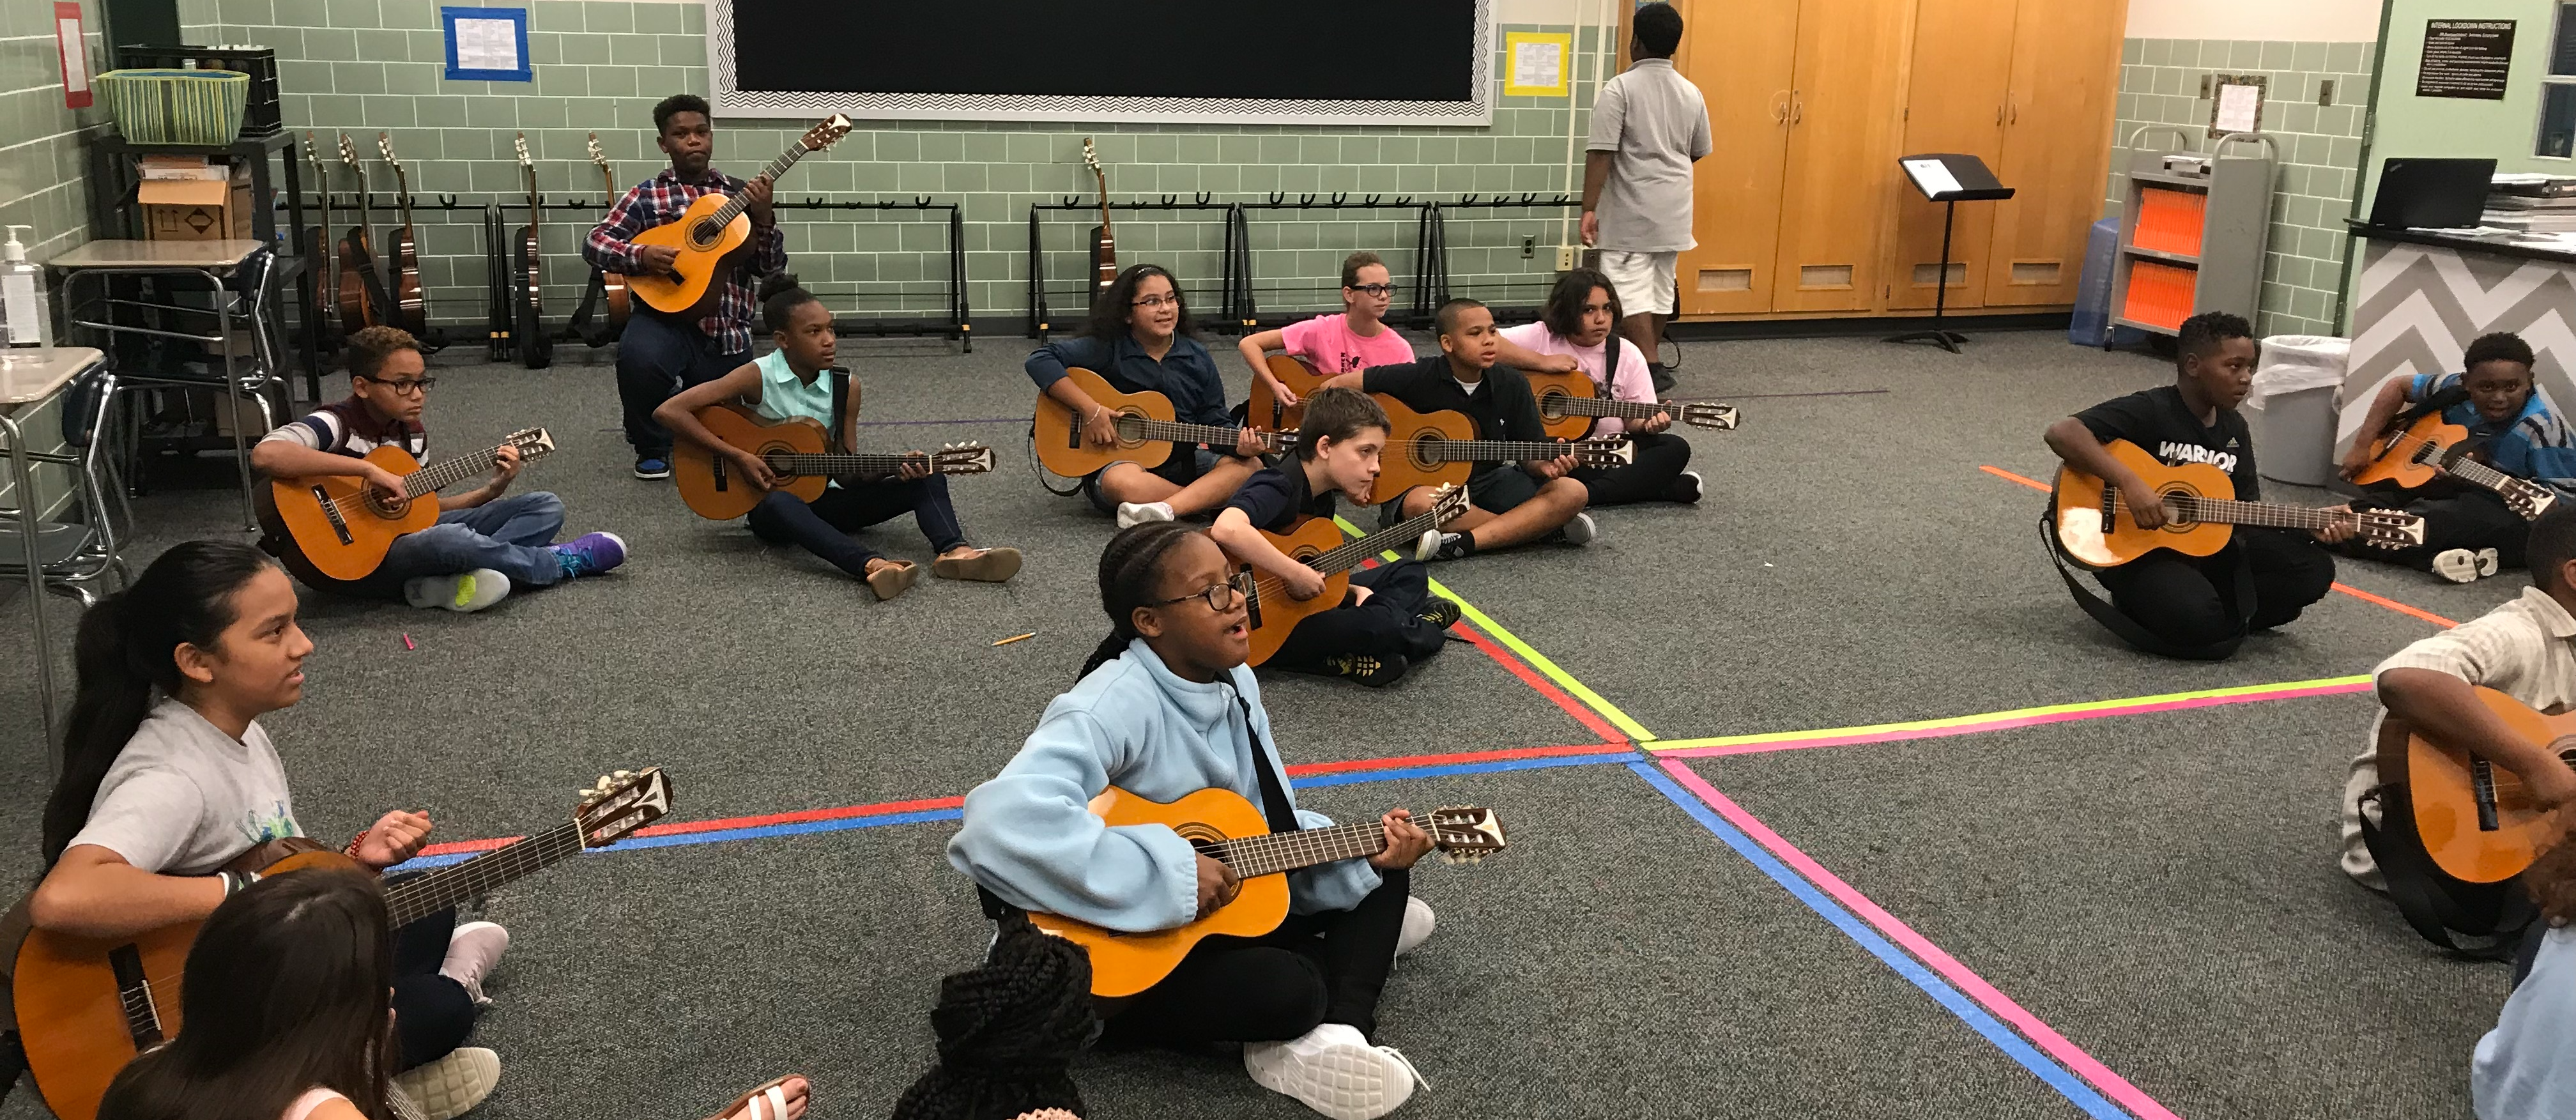 students playing guitars